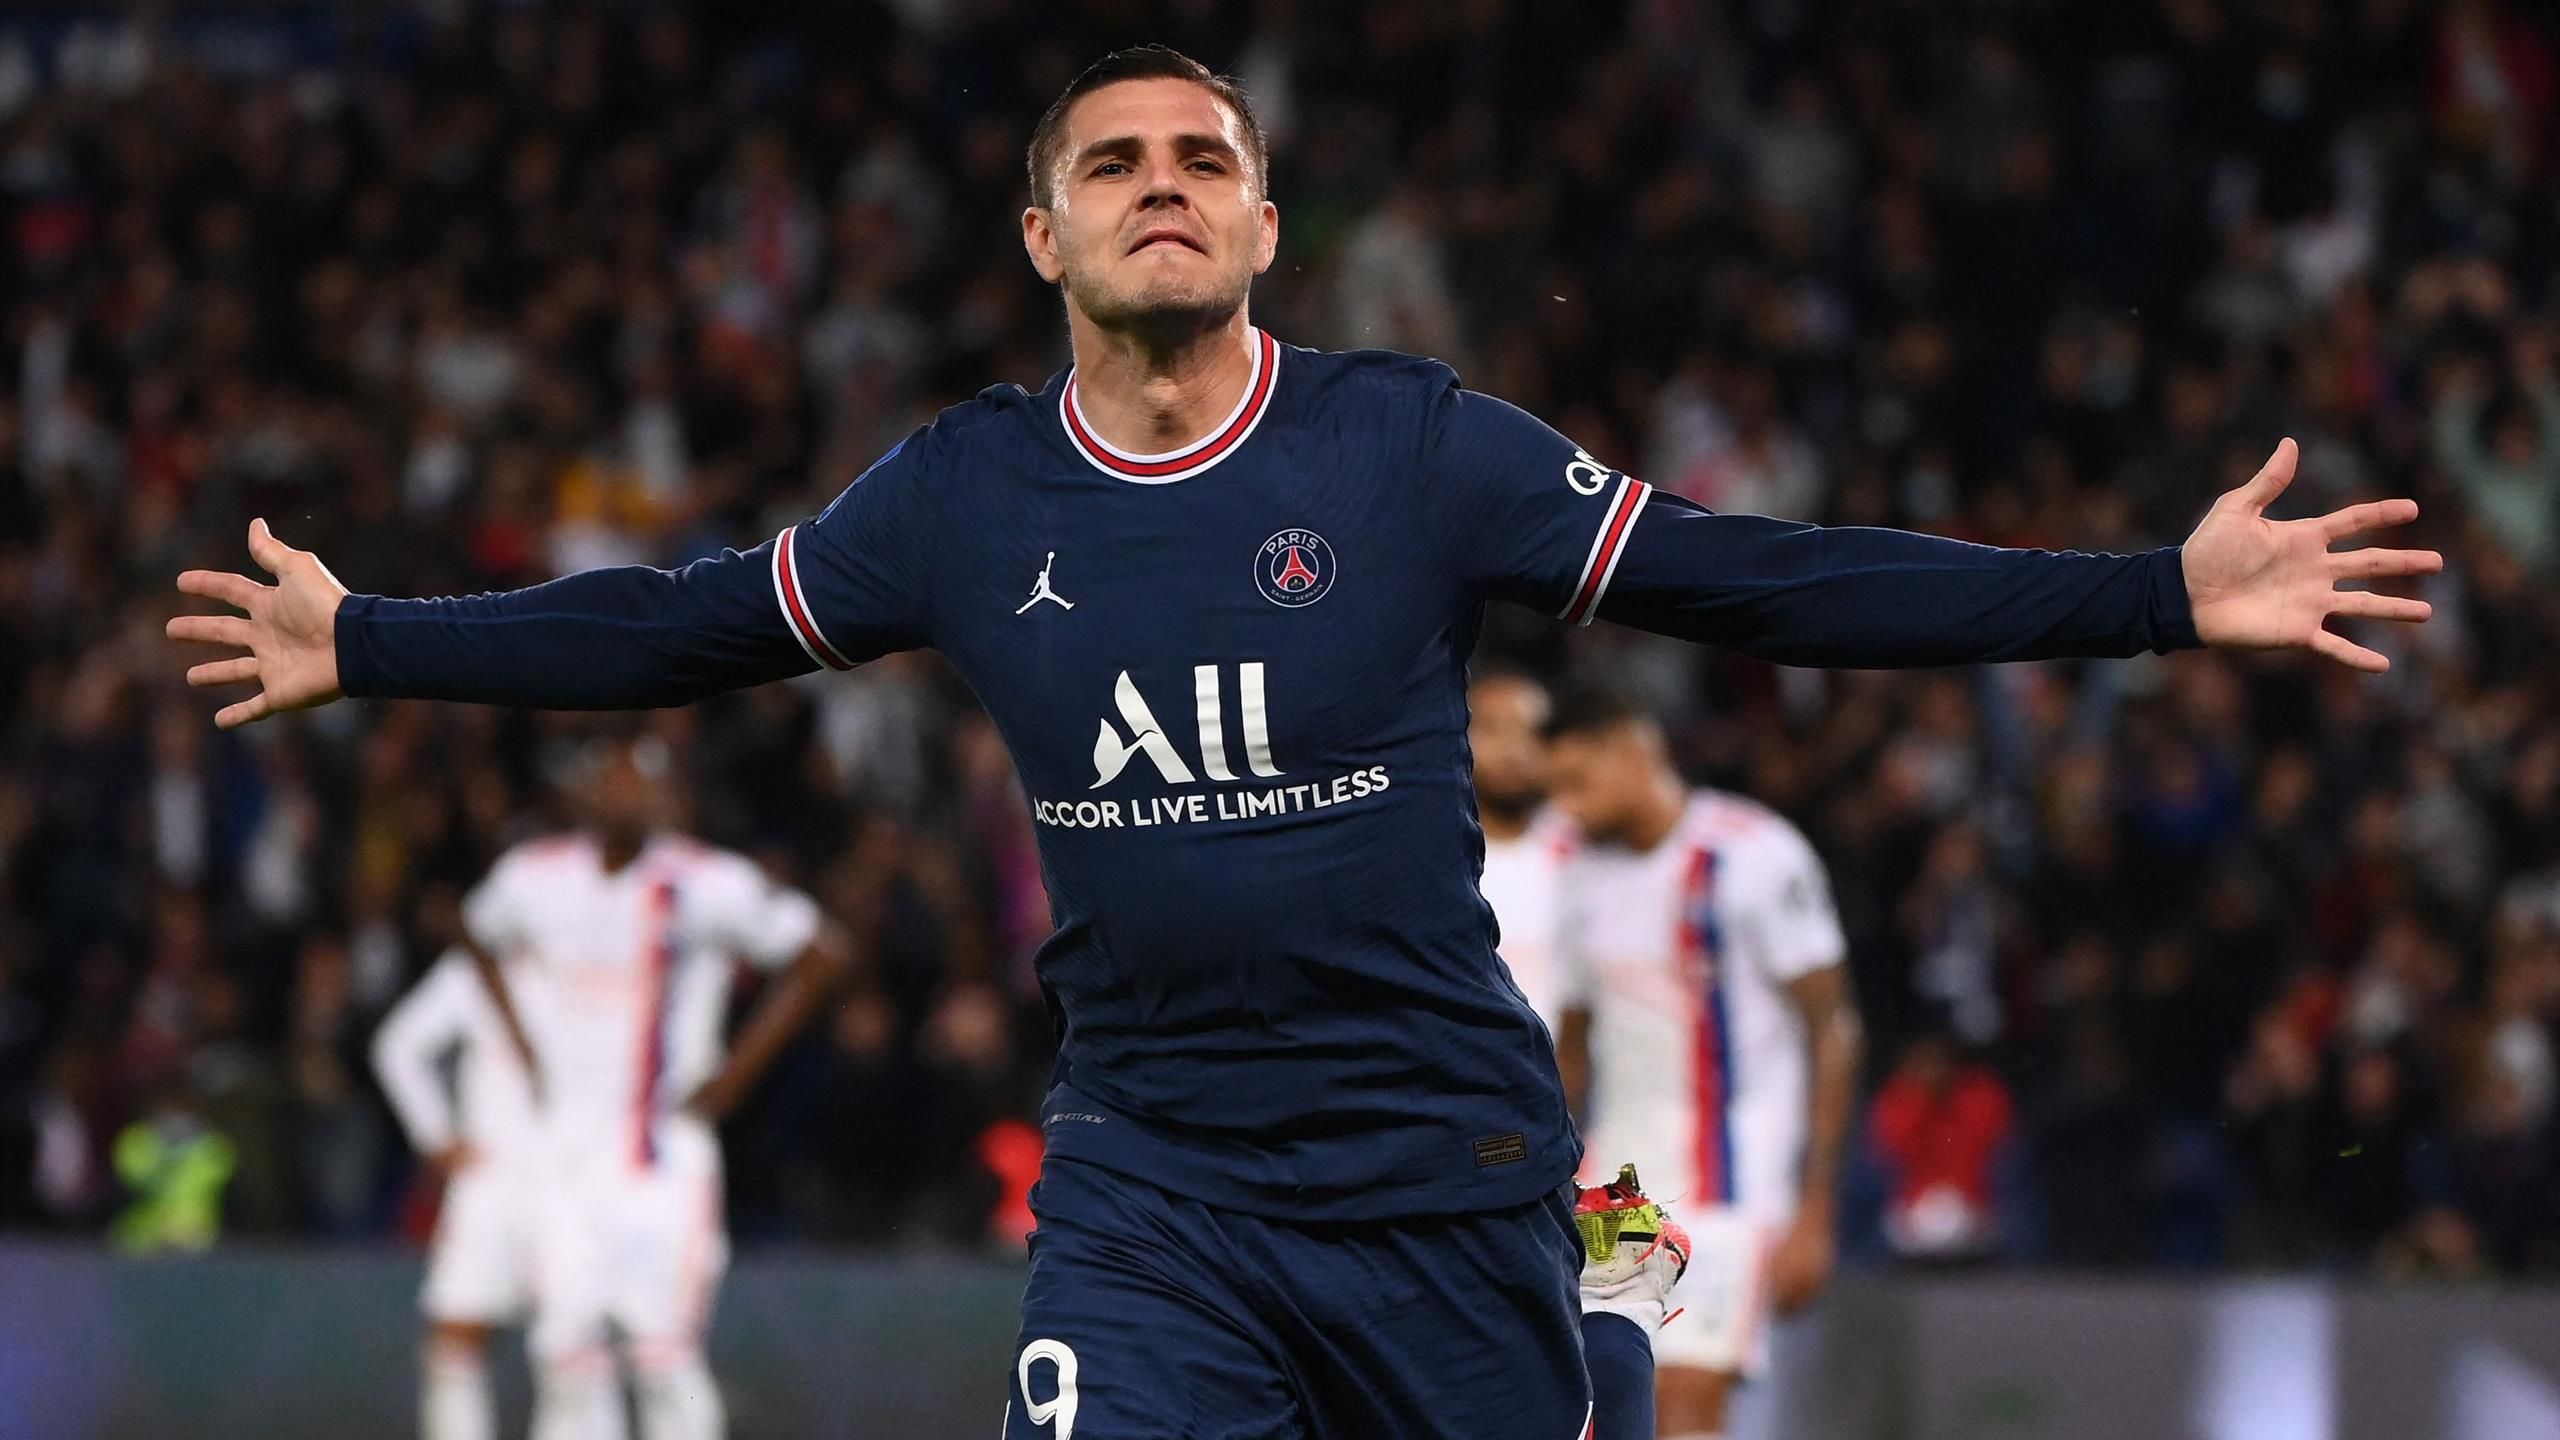 Paris Saint-Germain 2-1 Lyon Mauro Icardi emerges from bench to seal late win for PSG against Lyon